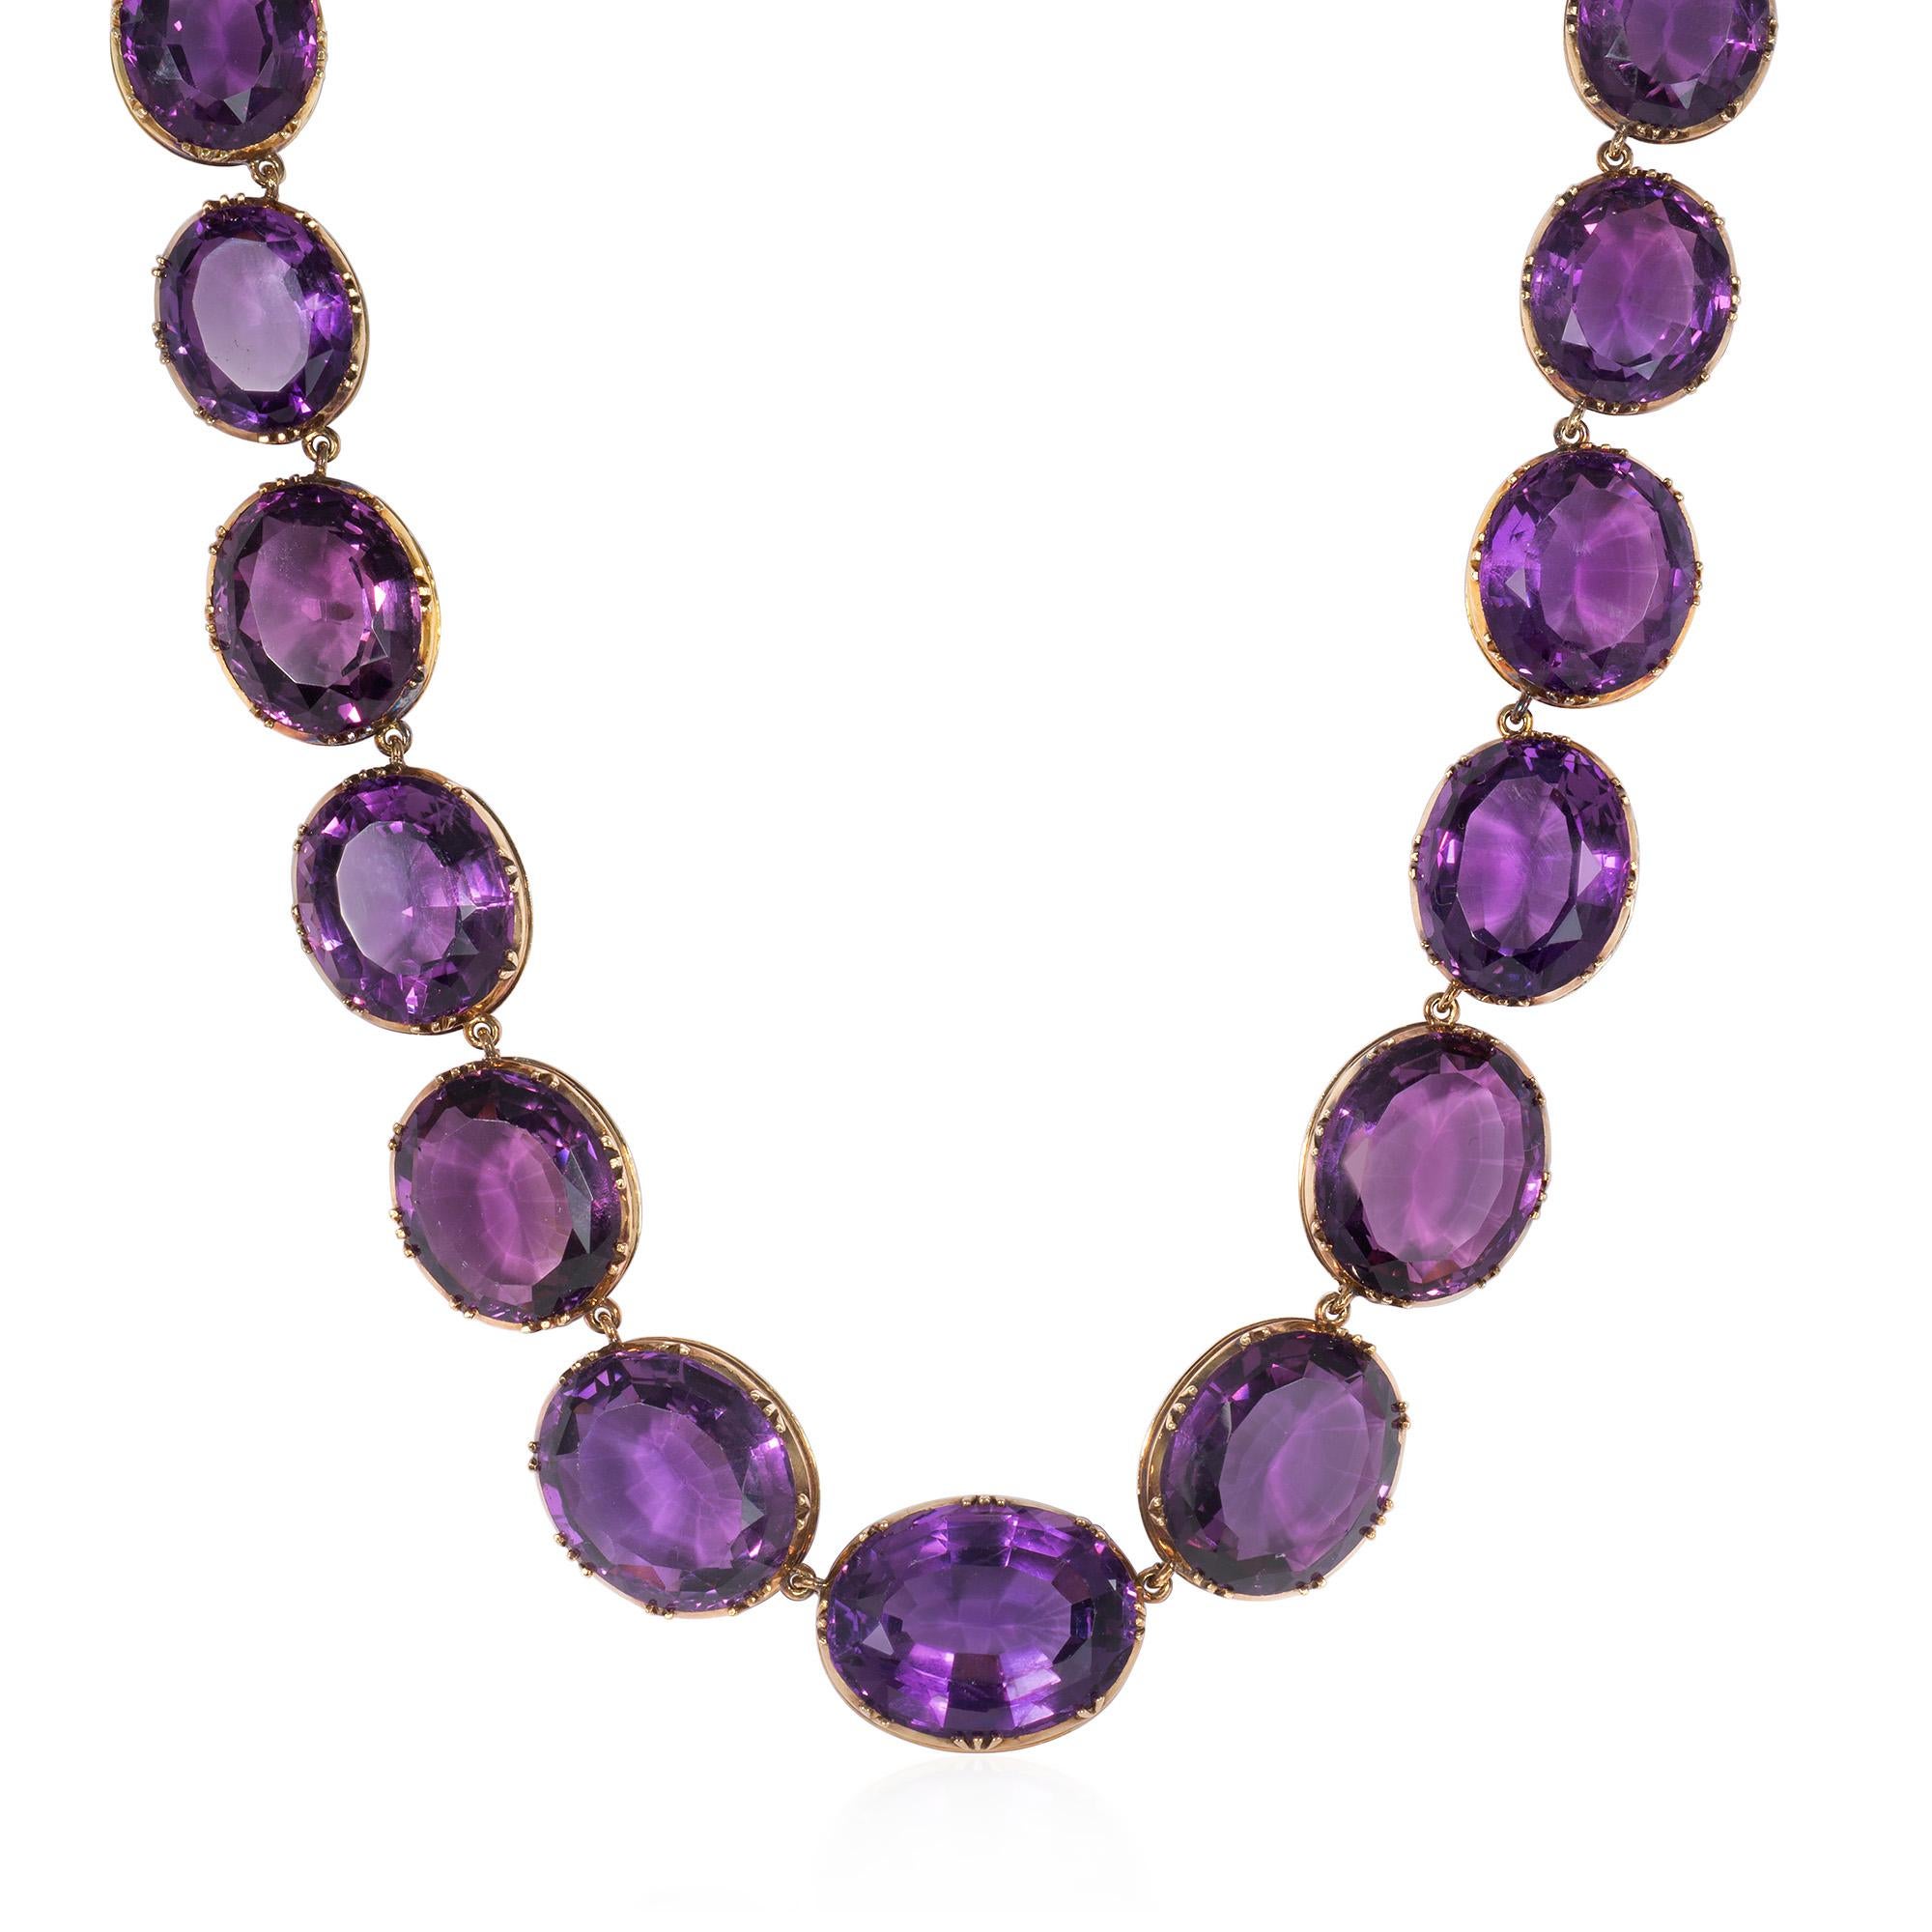 An antique Victorian period gold and amethyst rivière necklace comprised of graduated oval amethysts in open bezel settings, in 18k.  Stones measure approximately 22.50mm x 17.00mm to 15.50mm x 13.00mm

Please do not hesitate to request photos of